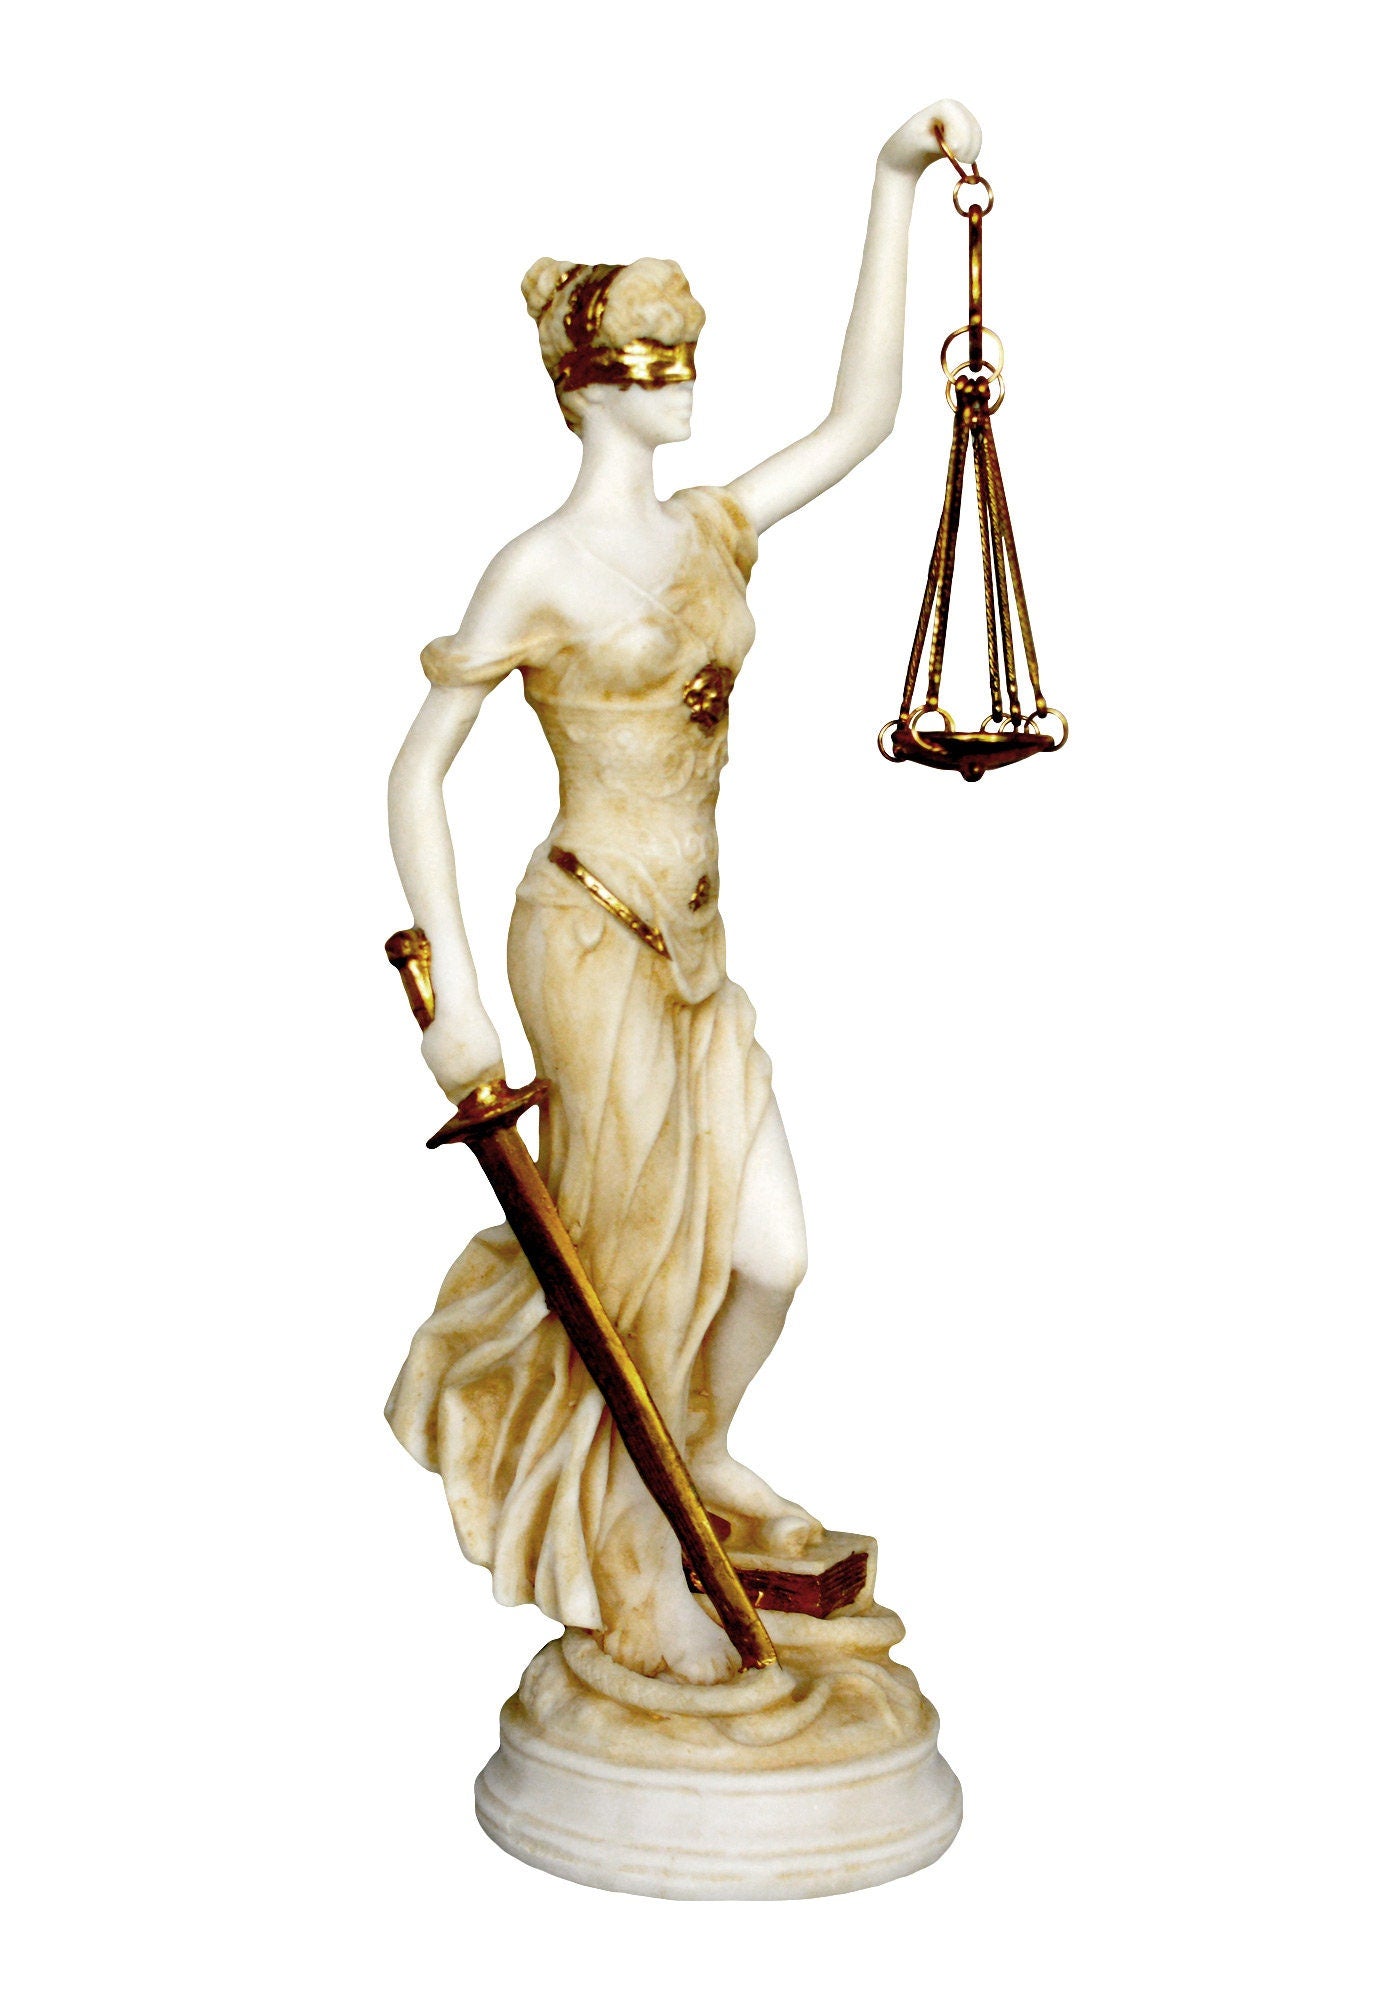 Themis Justitia - Greek Roman Goddess of Divine Law and Order, Fairness, Natural Law and Custom - Aged Alabaster Statue